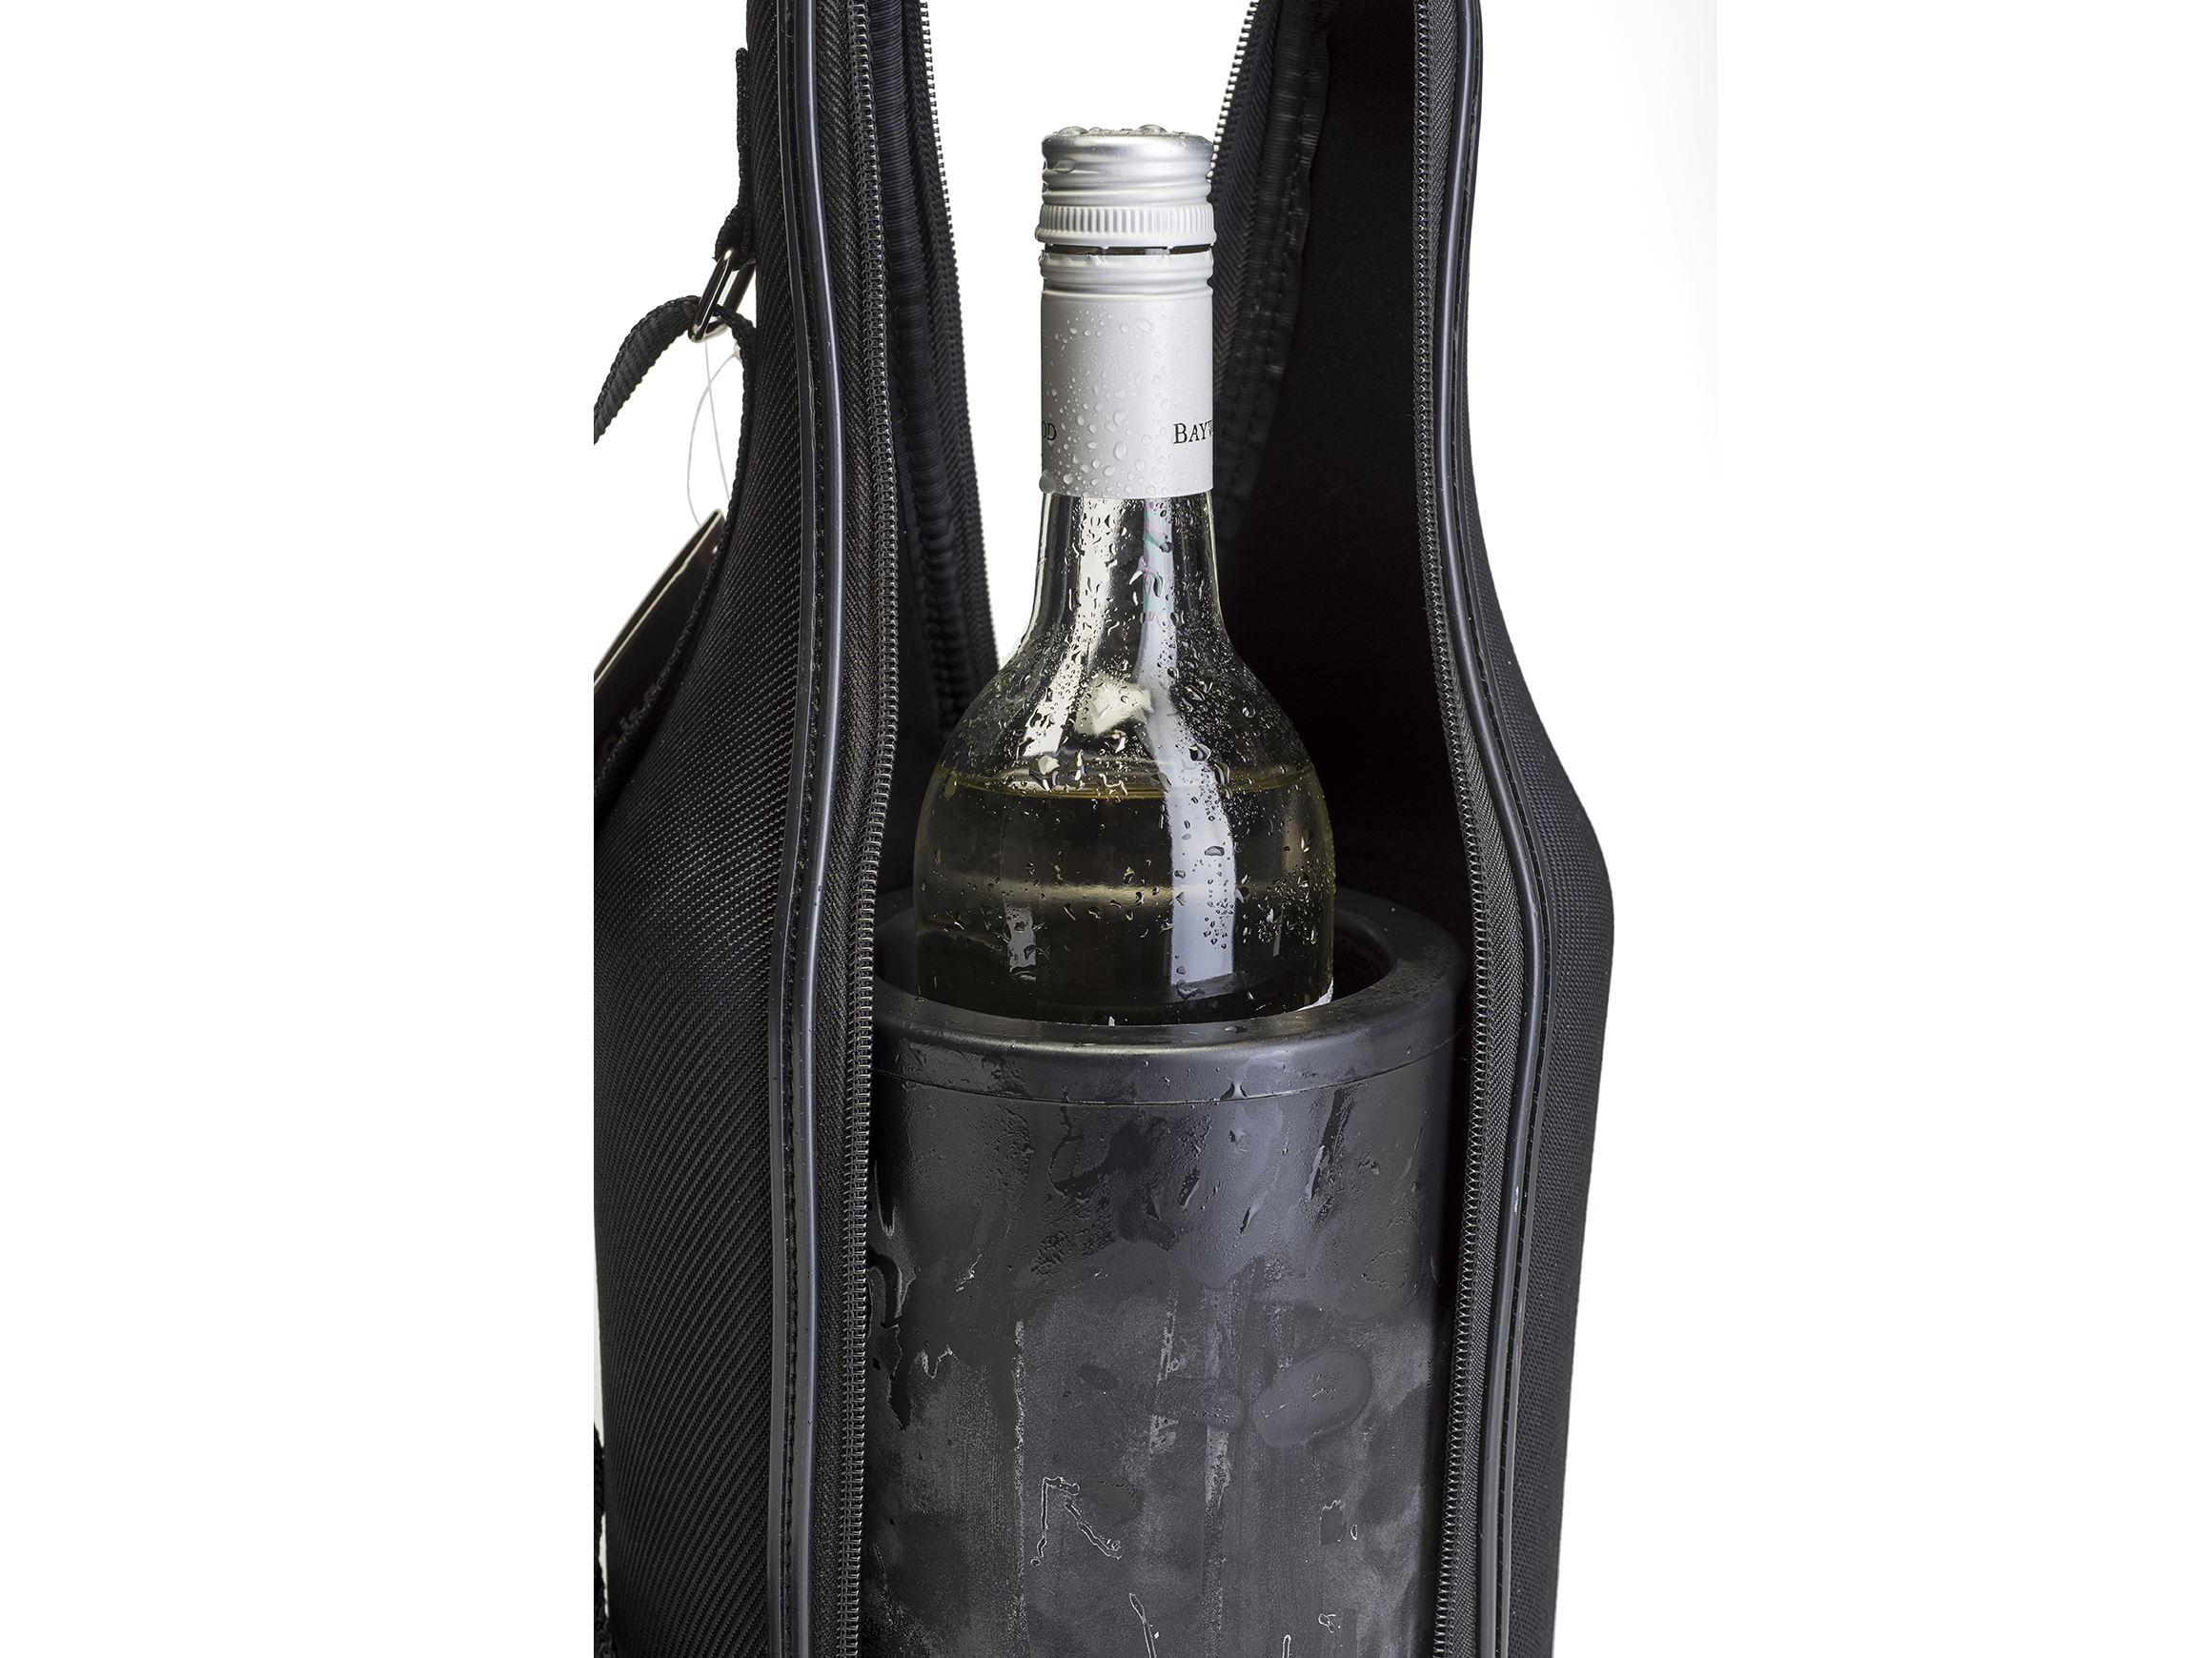  CaddyO wine bottle chiller straight from the freezer.png